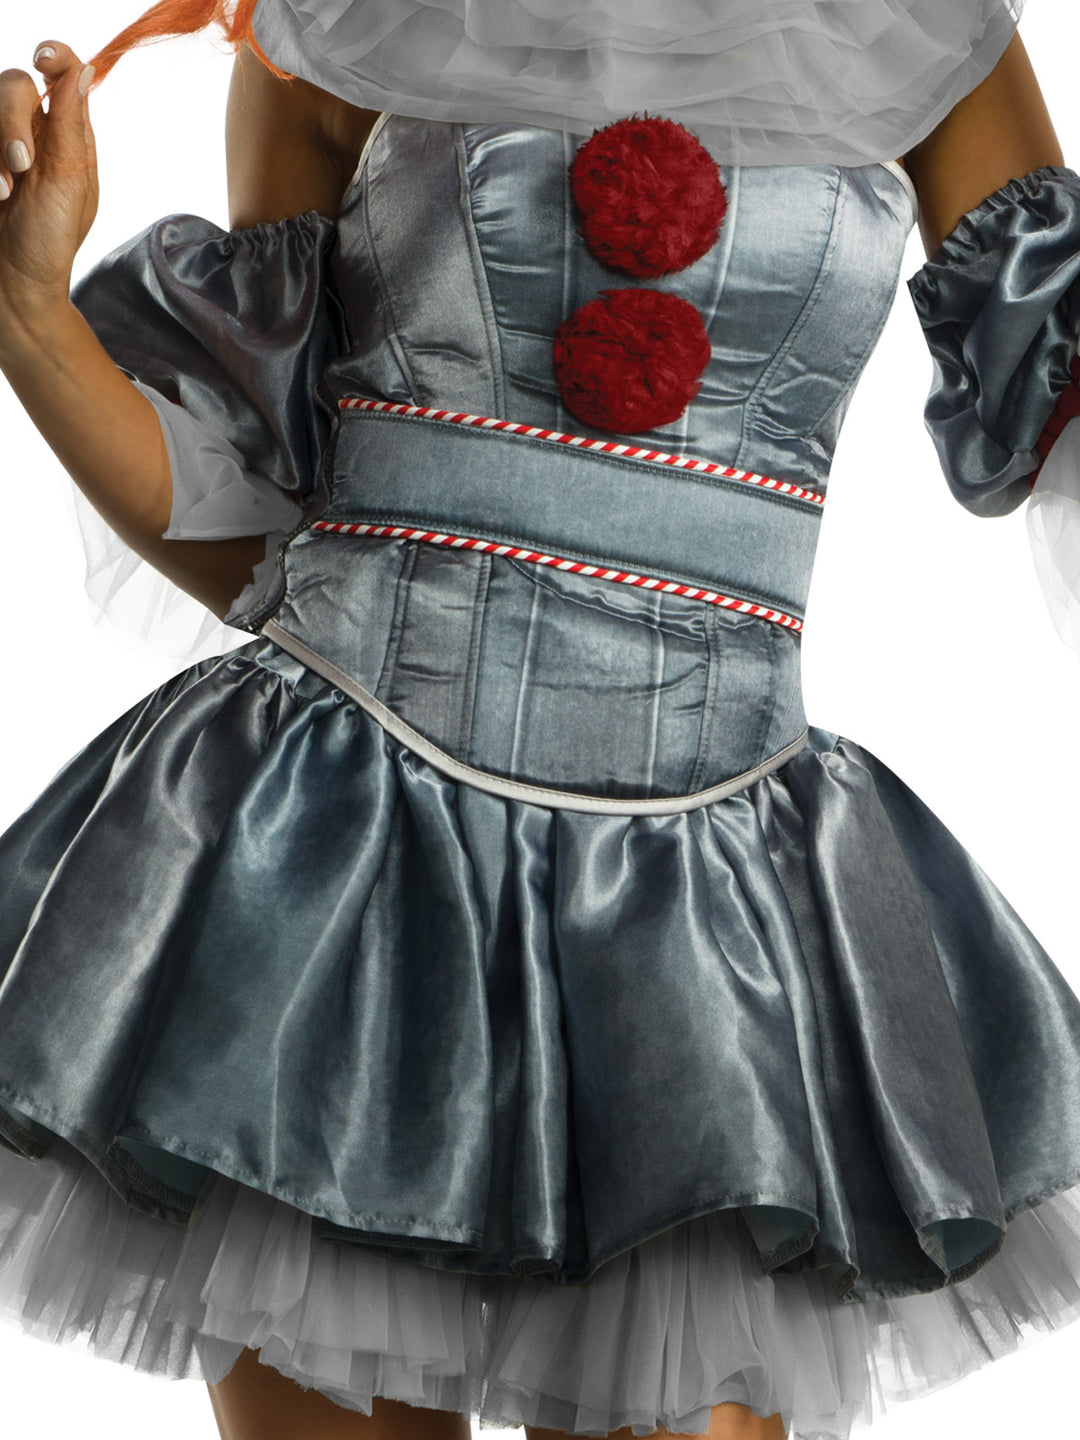 PENNYWISE 'IT' CH 2 DELUXE WOMENS COSTUME - Little Shop of Horrors